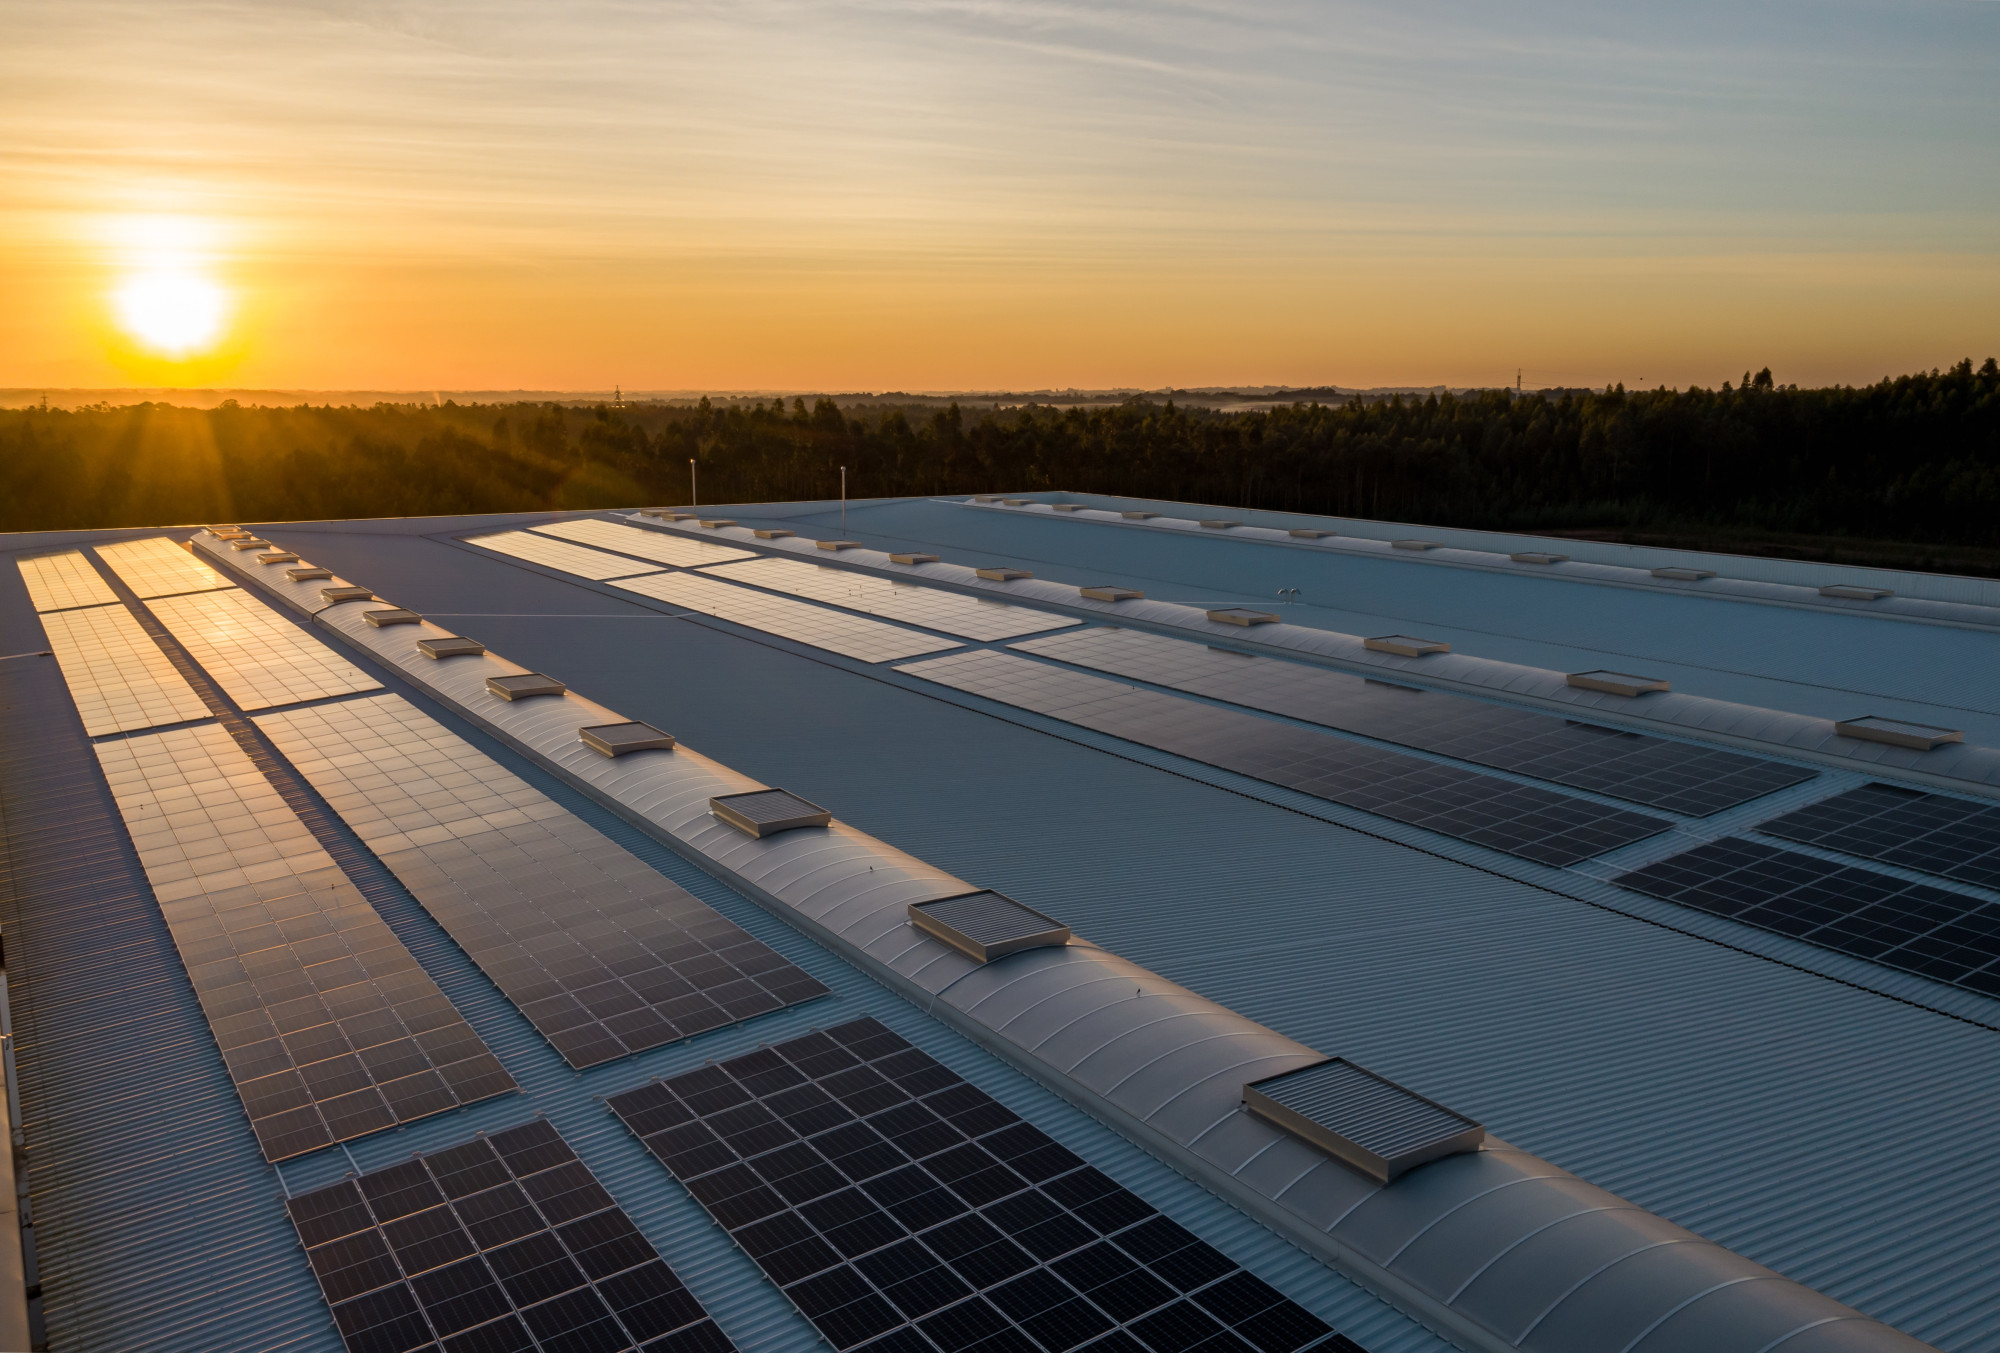 Factory roof with solar panels at sunset